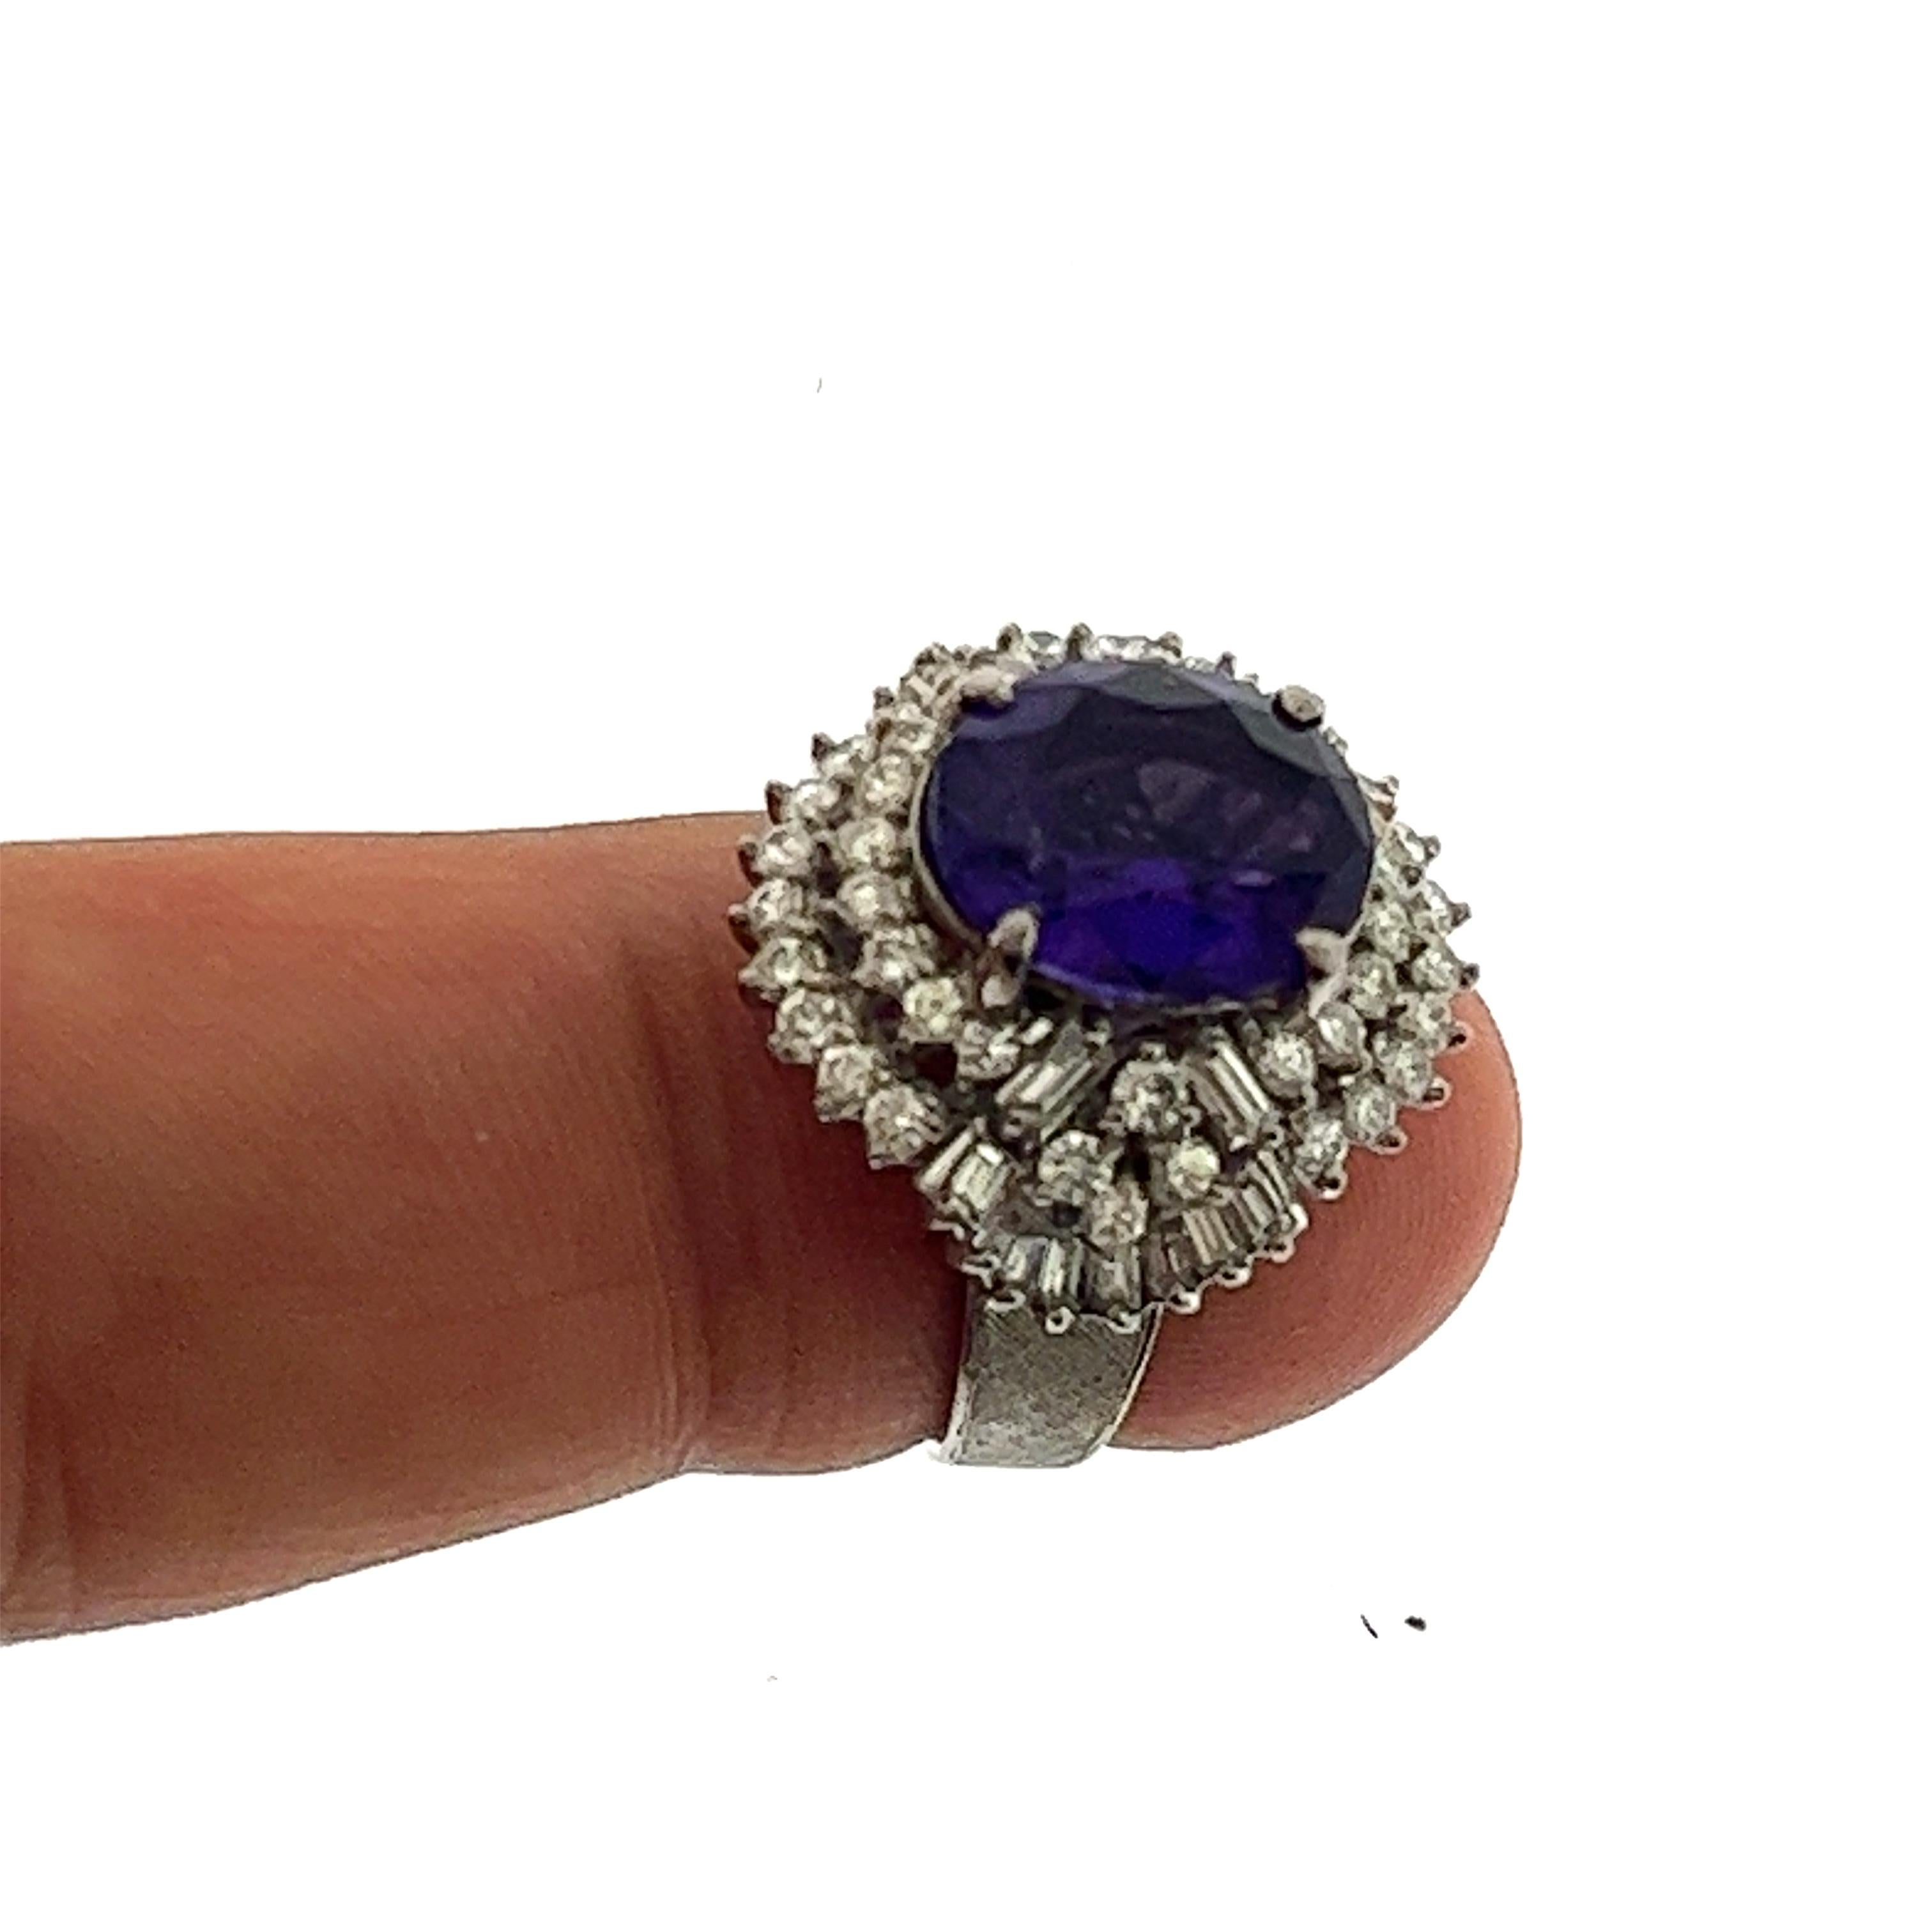 Offered here is natural earth mined Siberian Amethyst, centered in a vintage diamond ballerina ring, circa Retro period 1950-60.
Amethyst has a rich noble purple color with top clarity, measuring approximately 12.30mm by 10.20mm weighing about 4